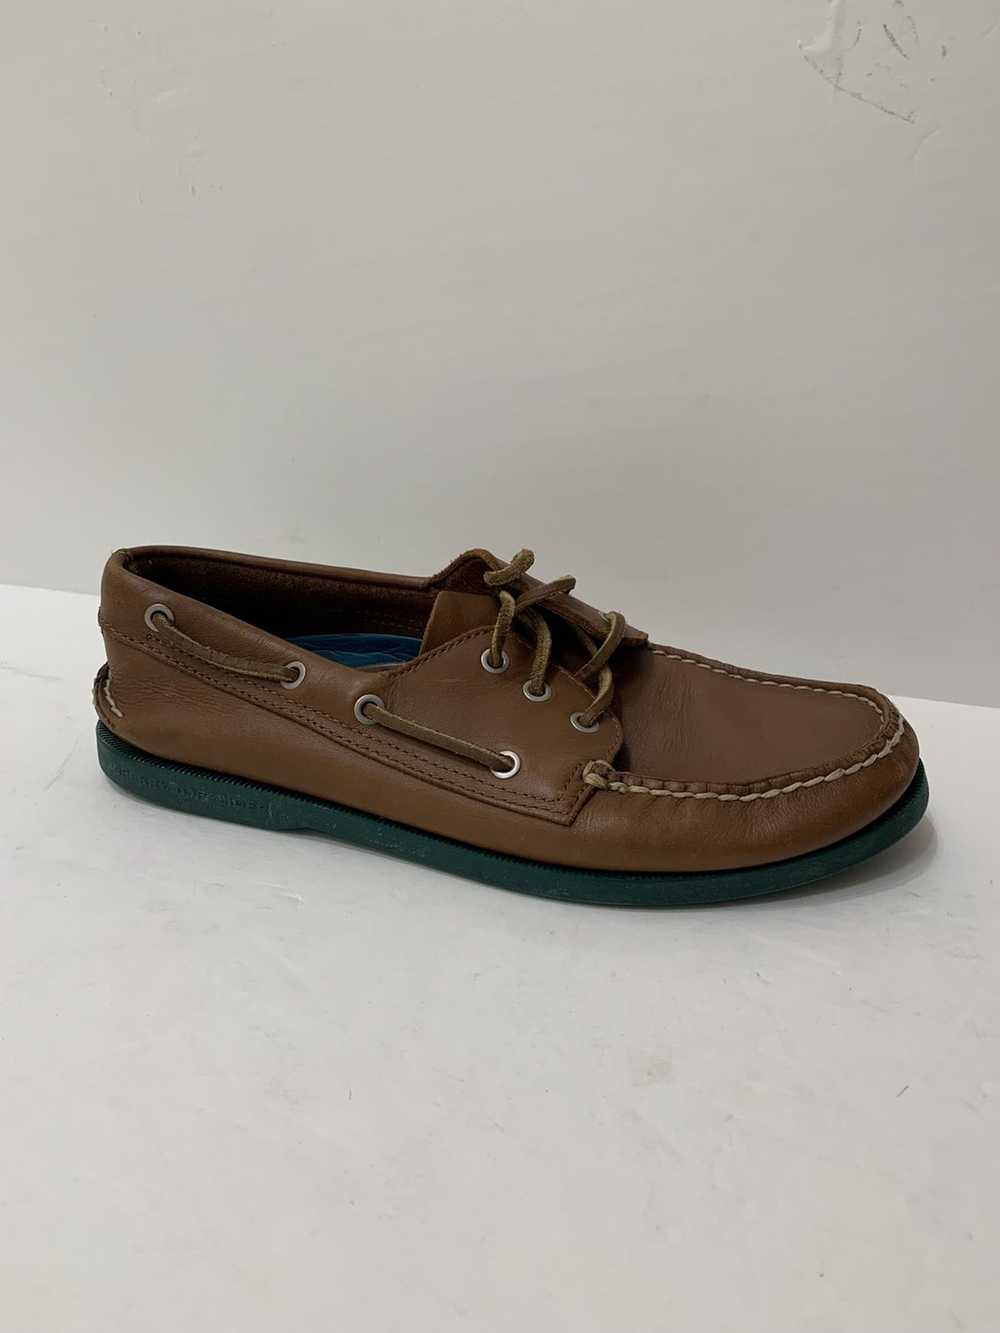 Sperry SPERRY TOP SIDER LEATHER BOAT SHOES - image 2